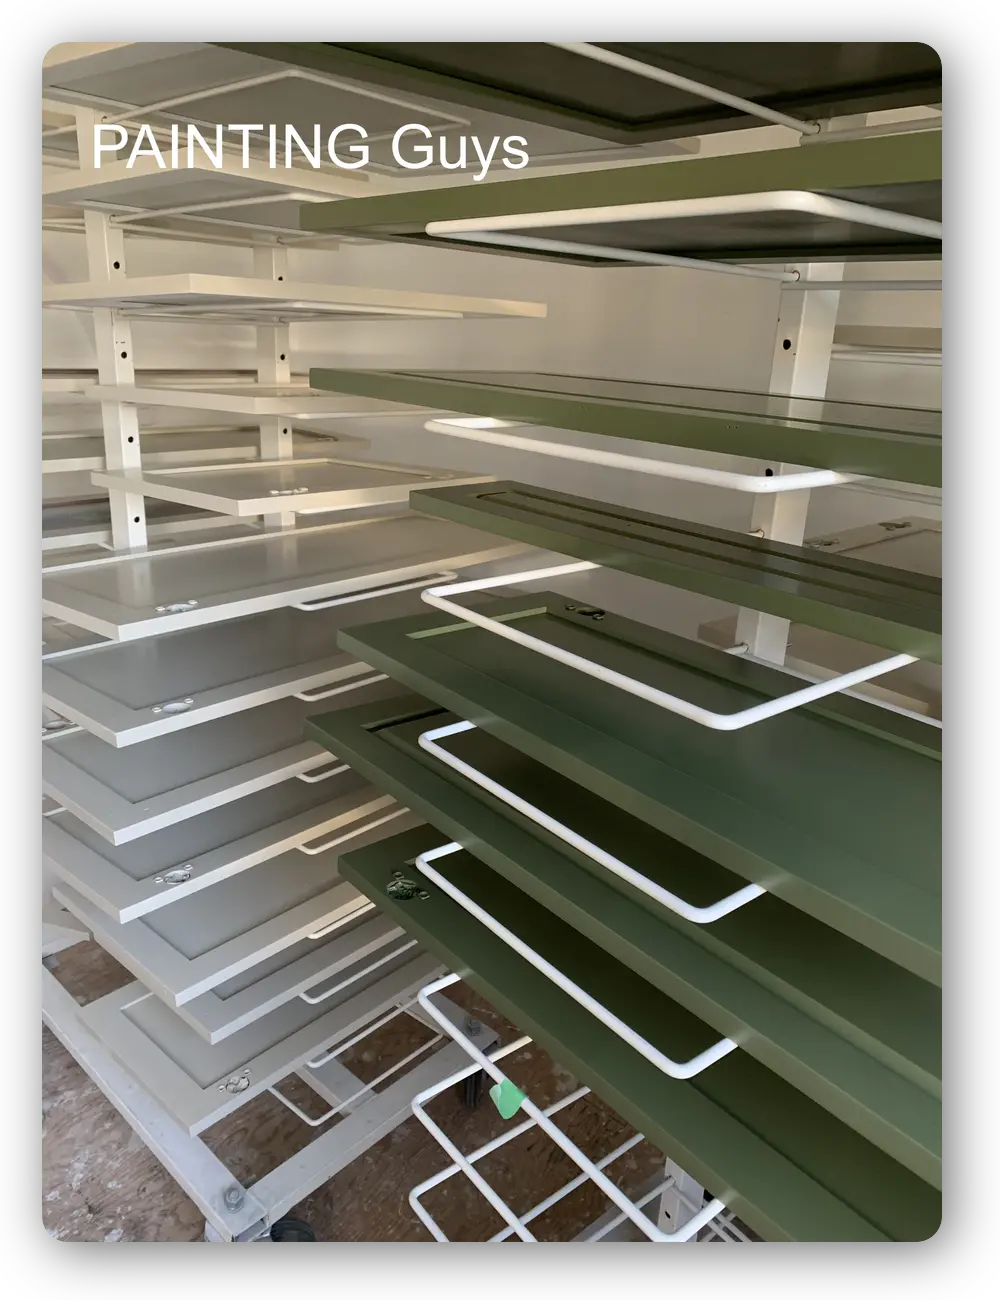 Old White and Bancha Green kitchen cabinets drying racks